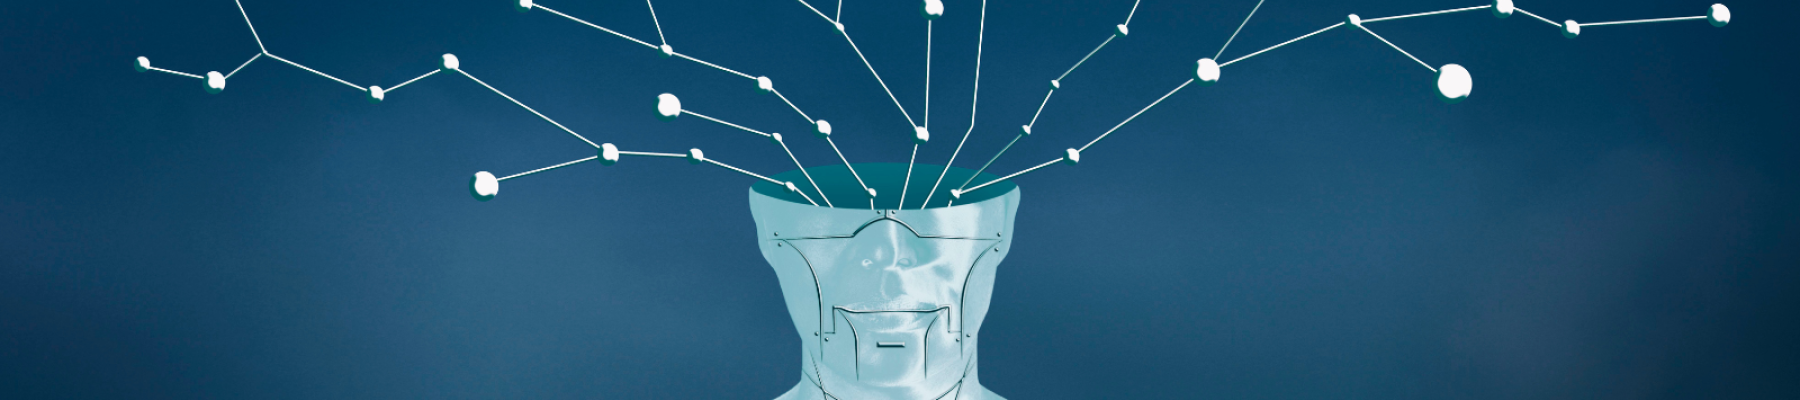 A light blue figure of a head against a dark blue background. From the head, neurons in the forms of lines and dots branch out